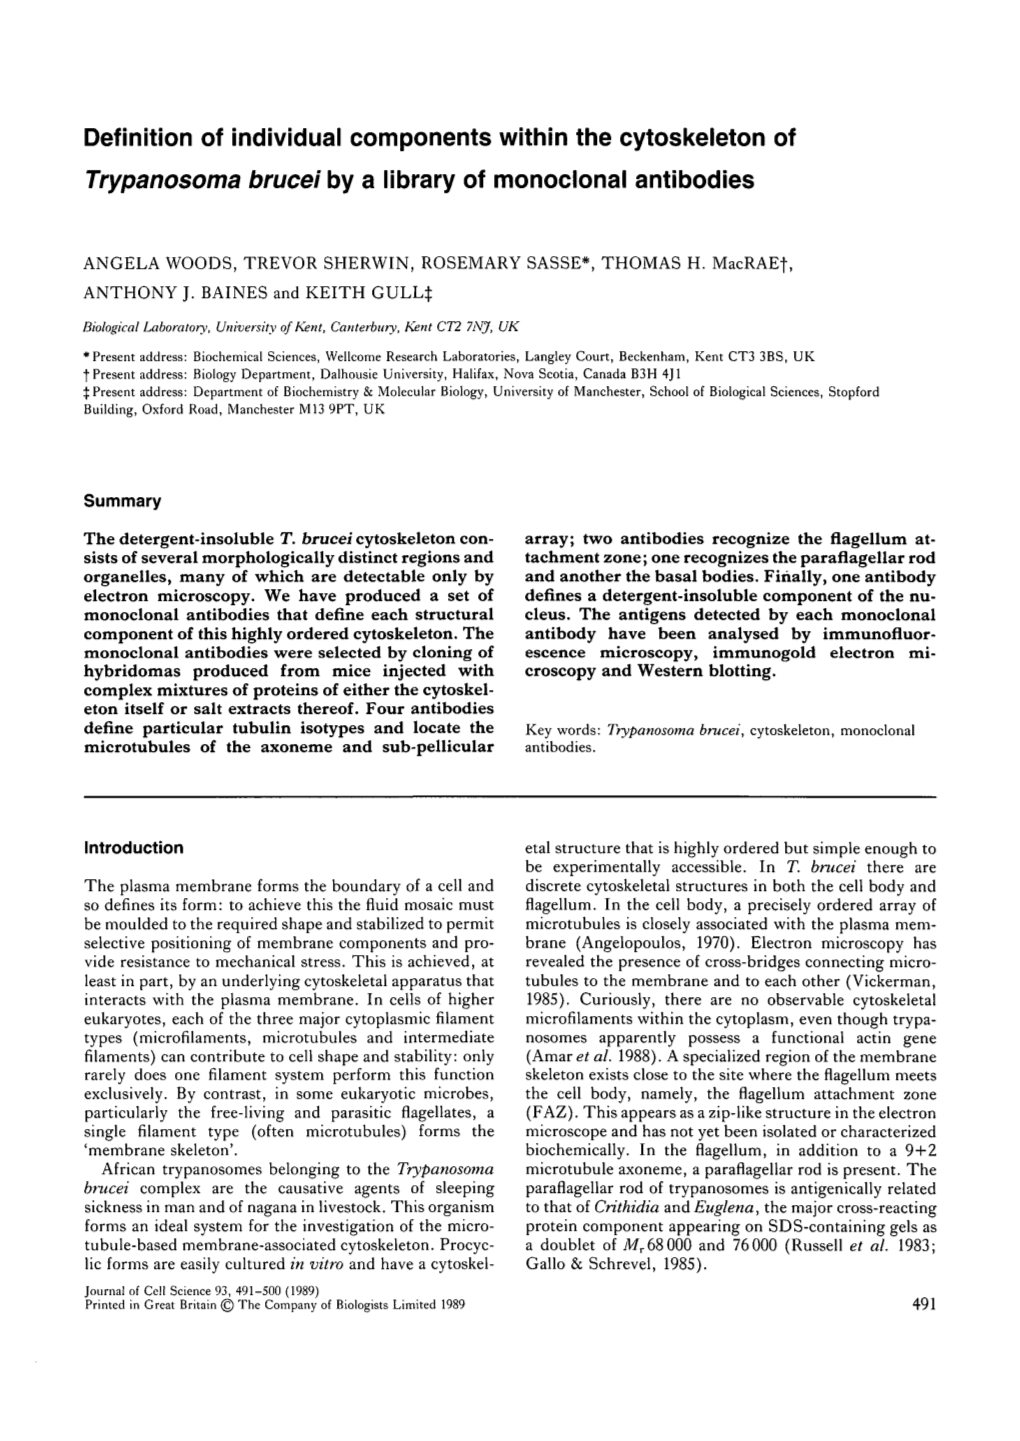 Definition of Individual Components Within the Cytoskeieton of Trypanosoma Brucei by a Library of Monoclonal Antibodies